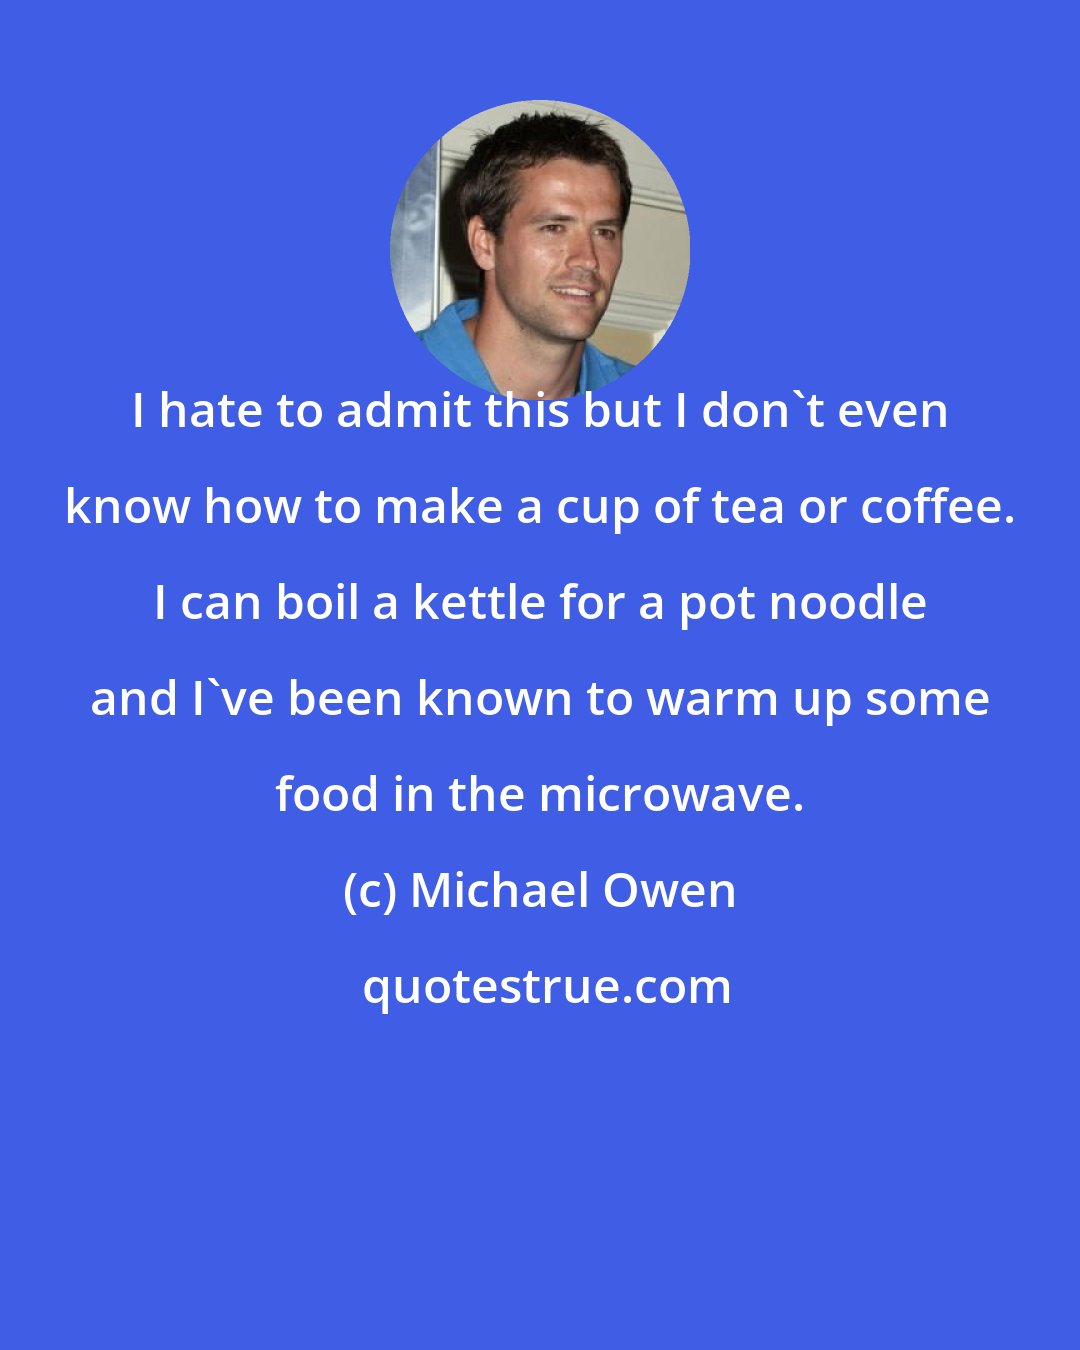 Michael Owen: I hate to admit this but I don't even know how to make a cup of tea or coffee. I can boil a kettle for a pot noodle and I've been known to warm up some food in the microwave.